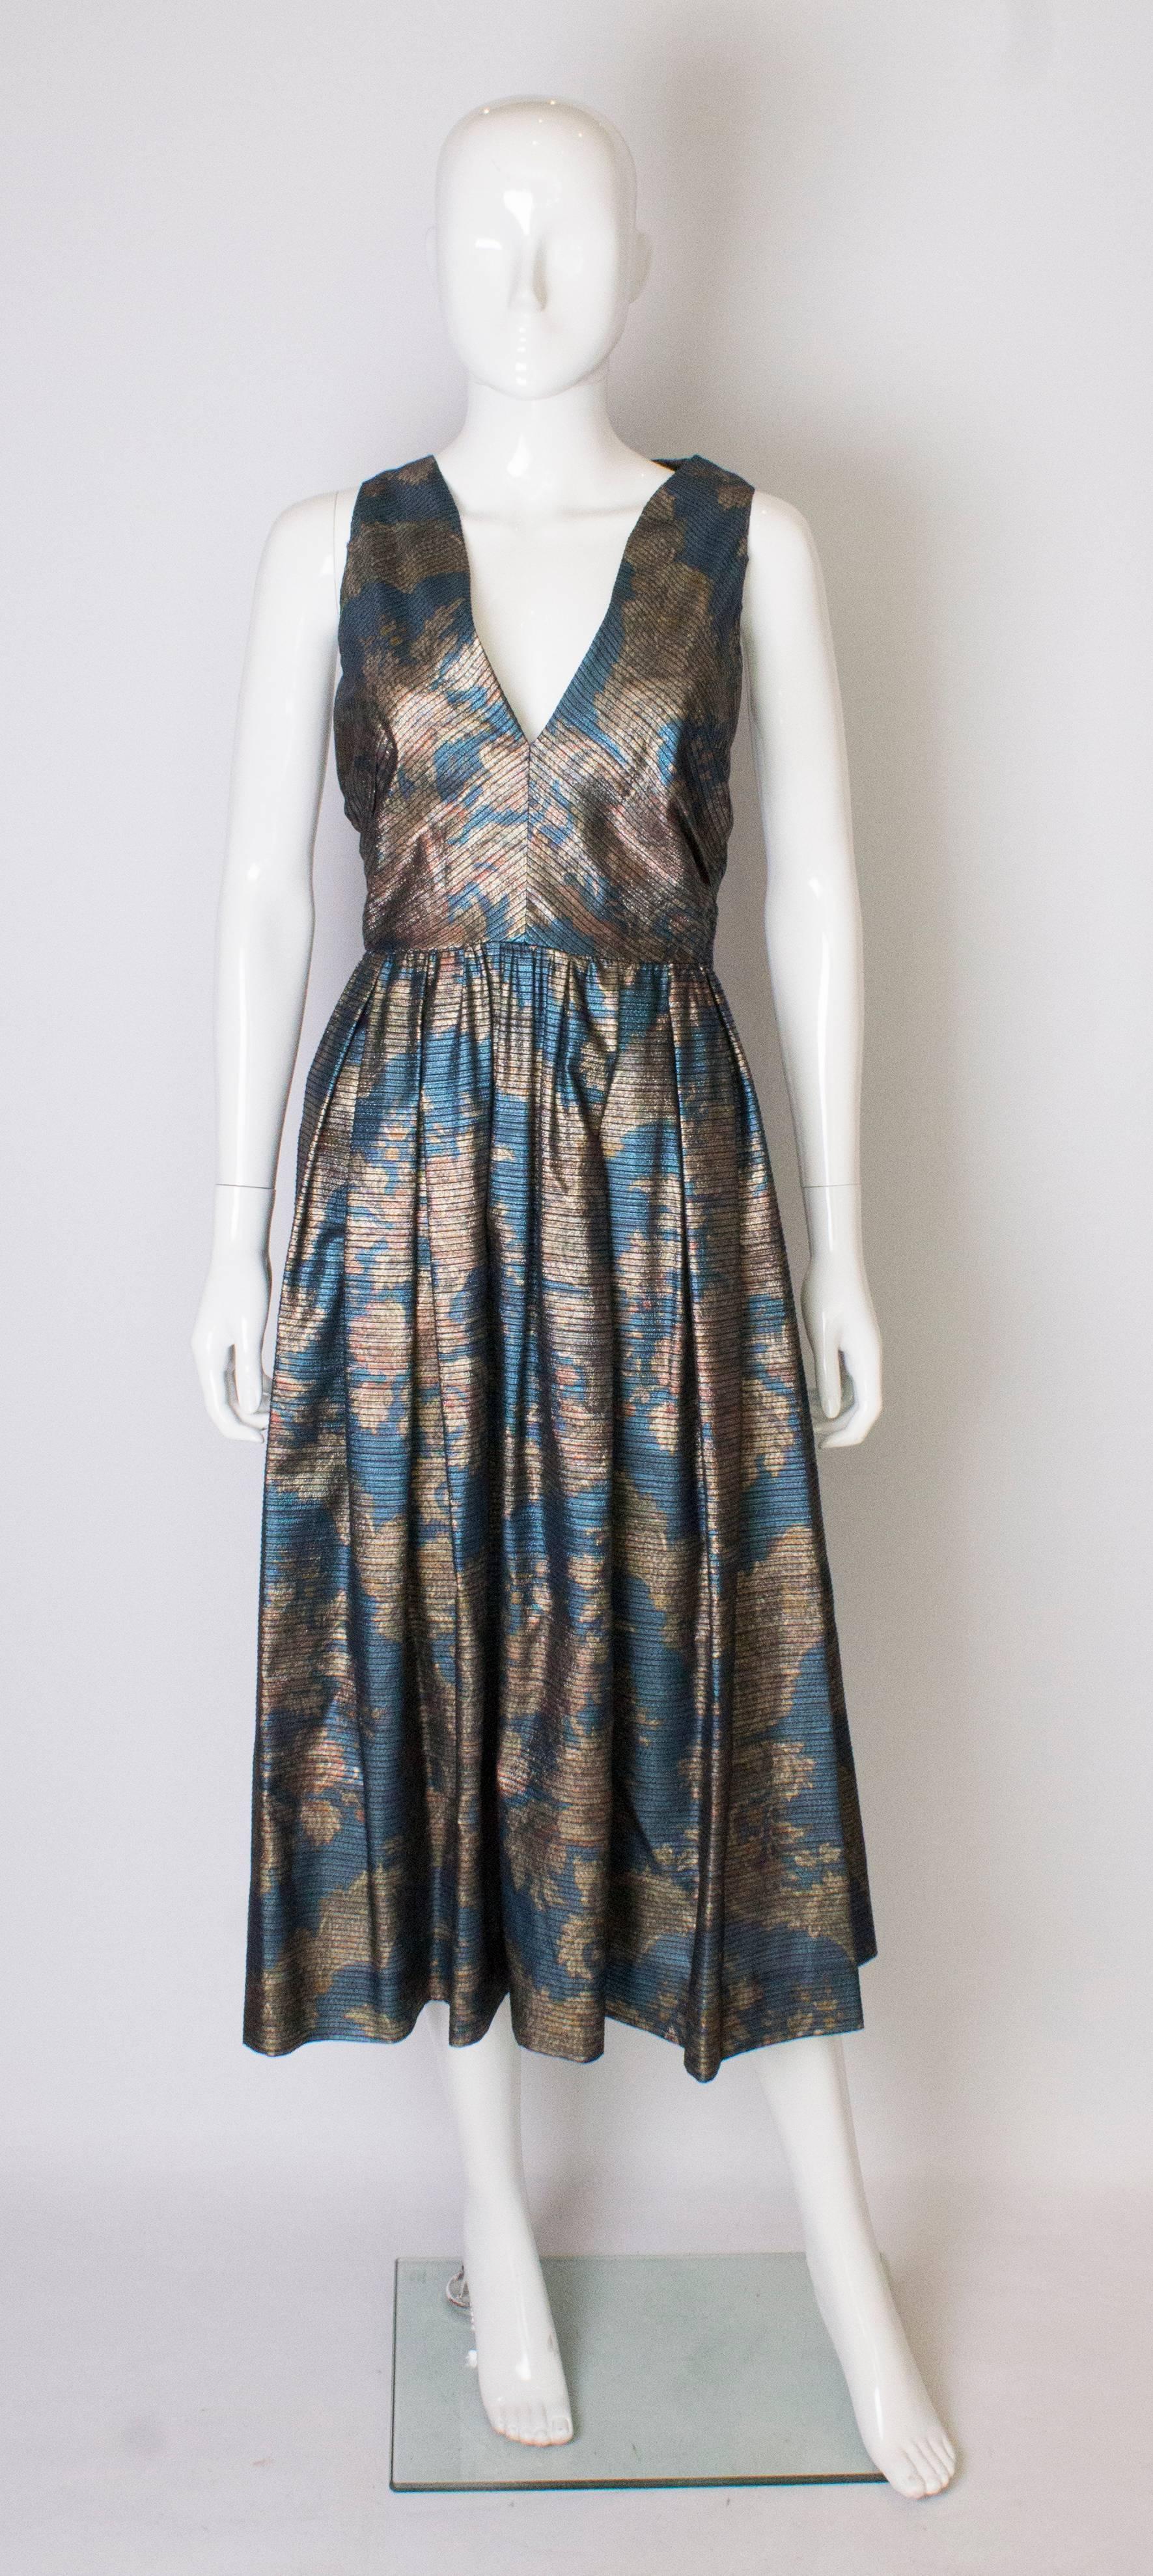 A wonderful vintage dress by Donald Campbell, in a blue, gold and rust coloured fabric .
The dress is sleeveless, with a v neckline and a central back zip.